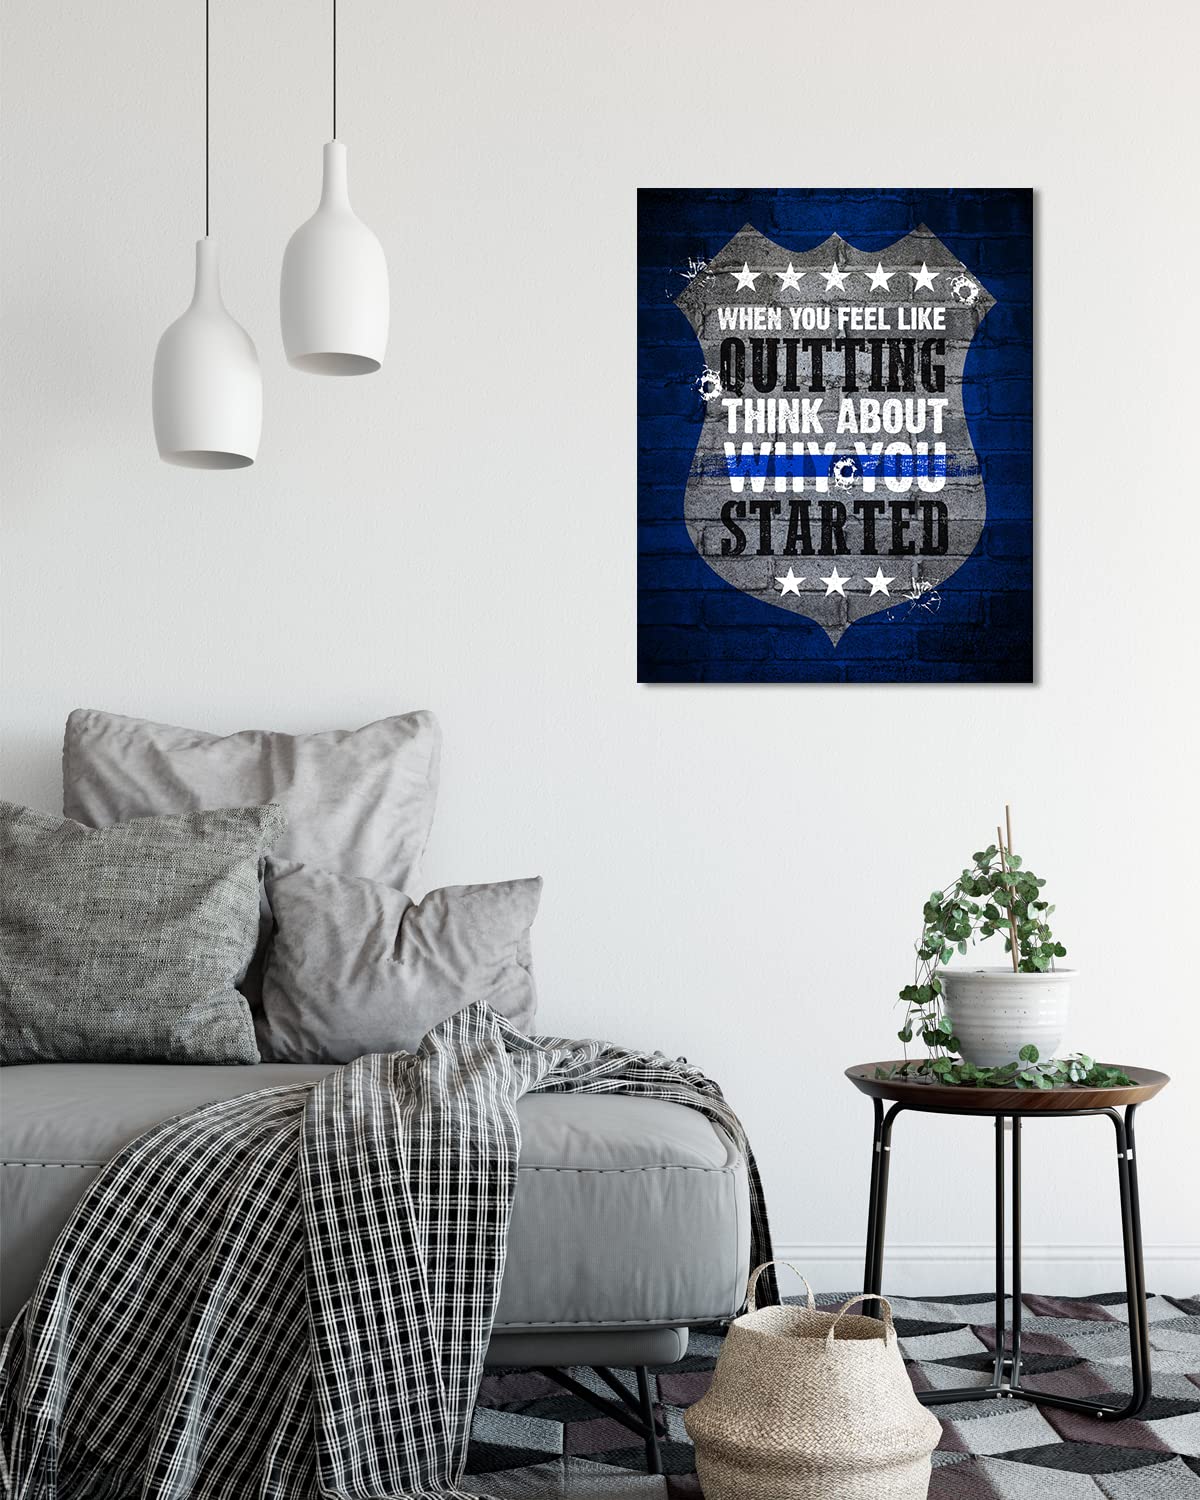 Thin Blue Line Wall Art - Law Enforcement Prints - Police Officer Gifts - Police Academy Graduation - Police Officer Wall Decor - Law Enforcement Appreciation Gift